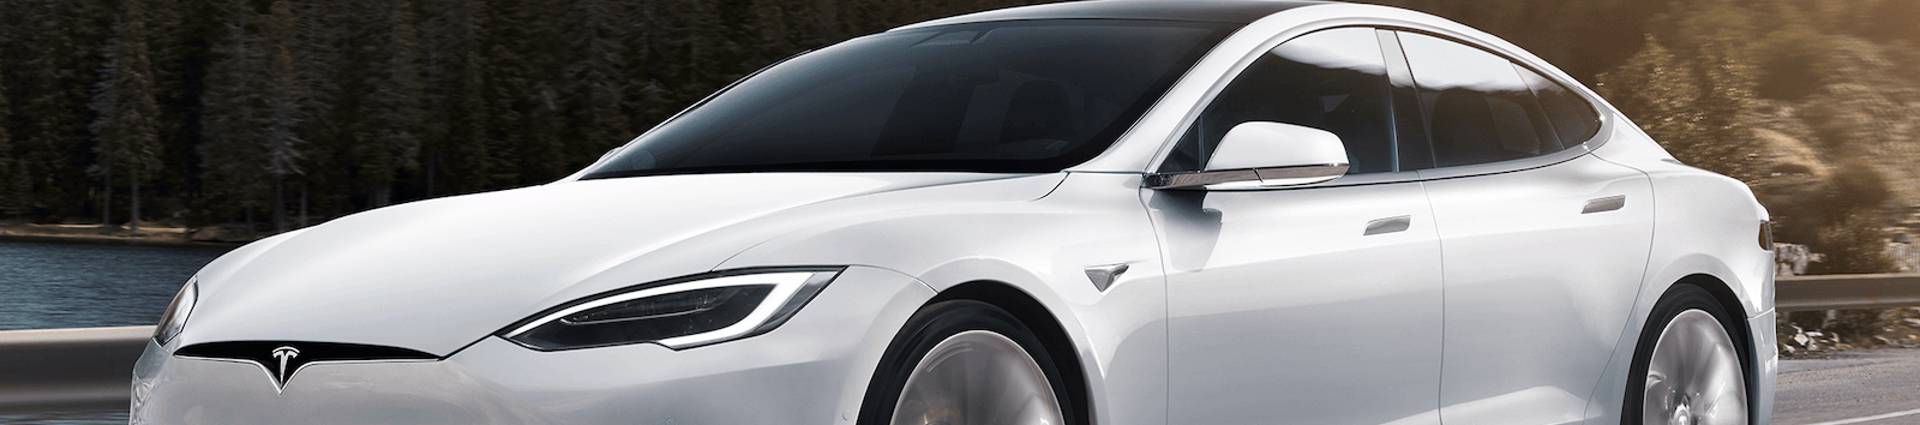 Protect Your Tesla with Window Tint in Denver